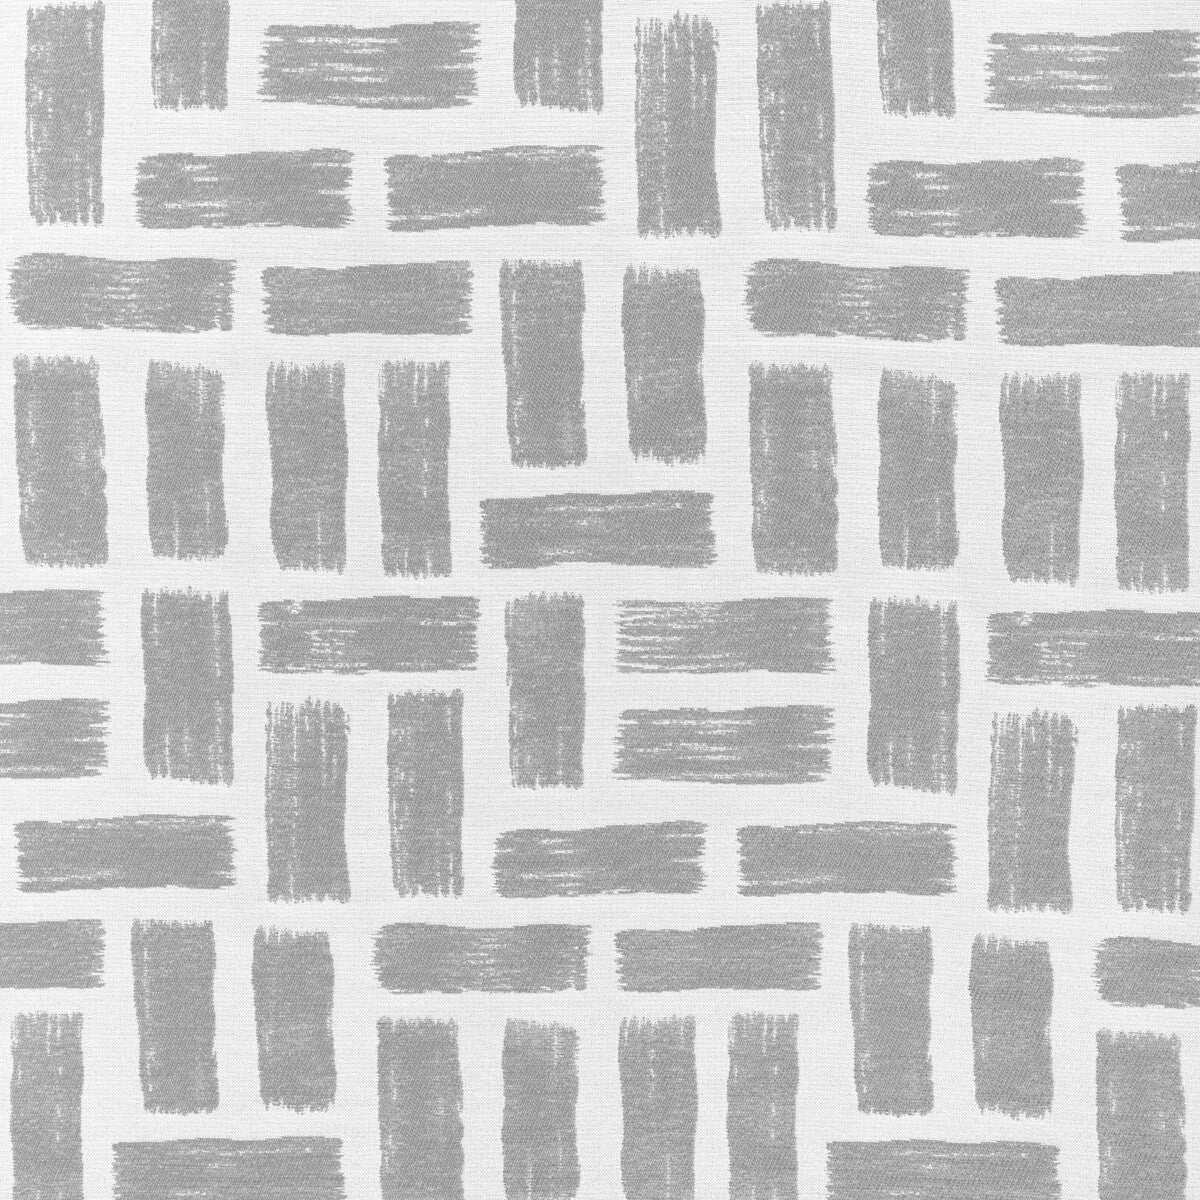 Brickwork fabric in stone color - pattern 37055.11.0 - by Kravet Design in the Thom Filicia Latitude collection